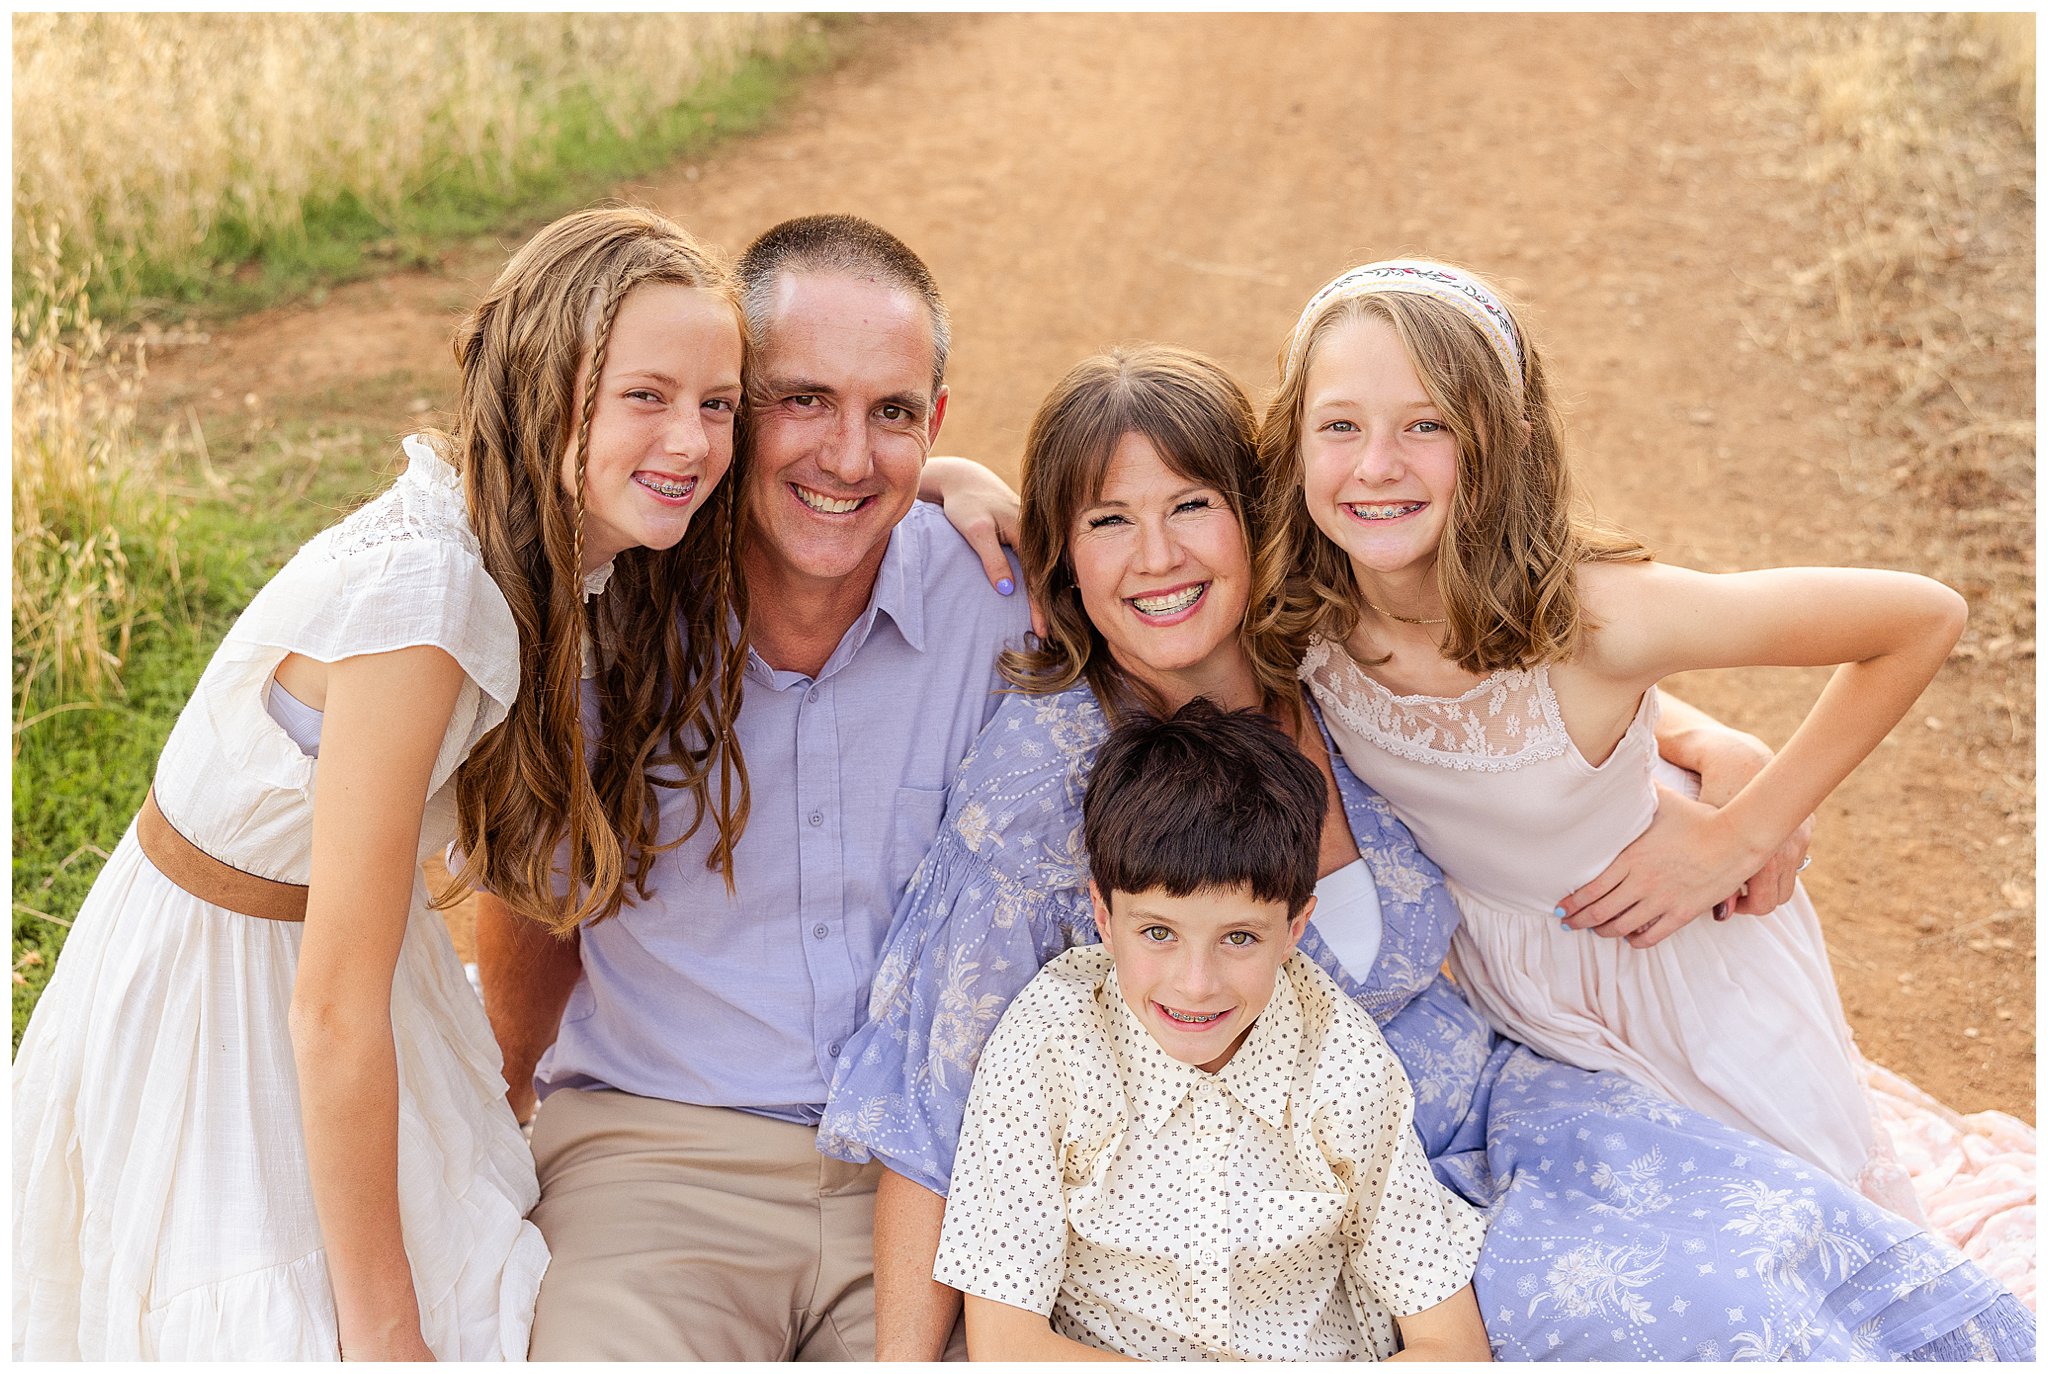 Upper Bidwell Park Family Session Chico CA Fall October Light Pastels Dresses Trail Grass,